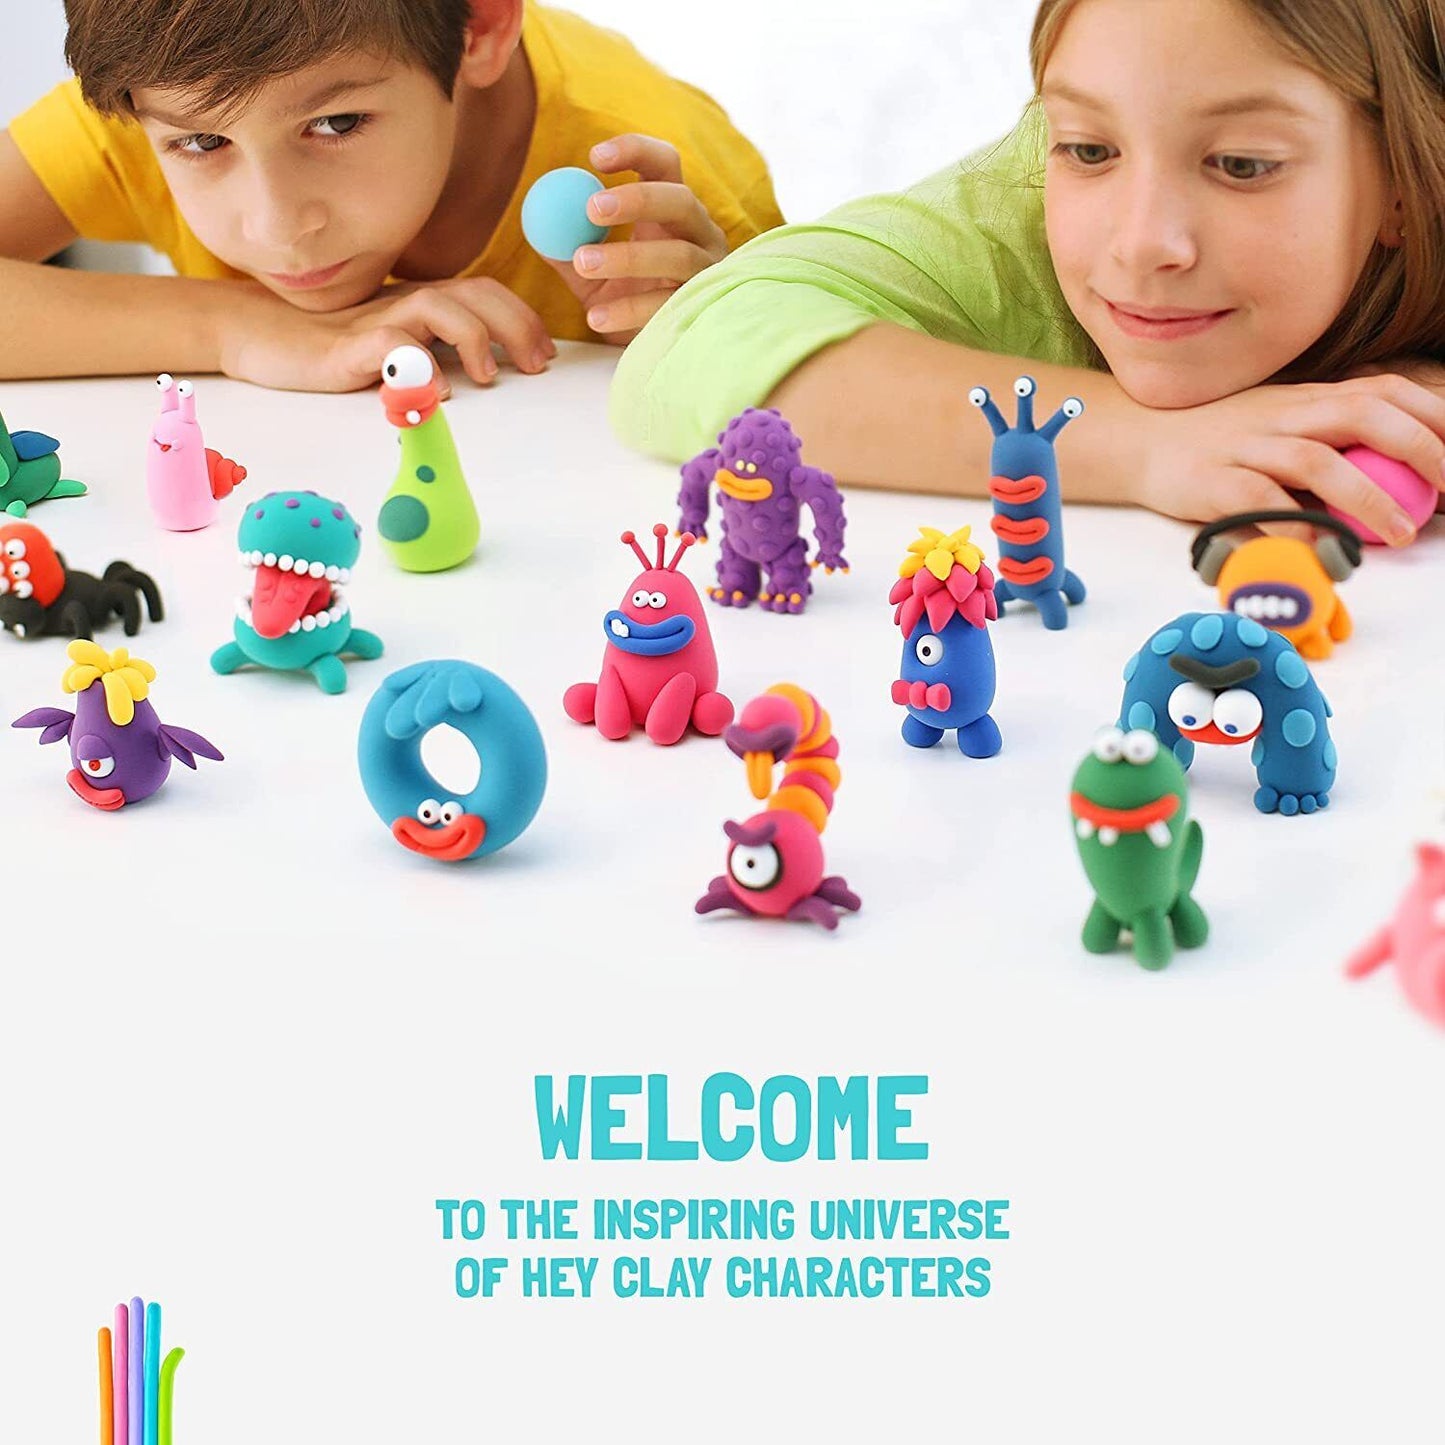 Hey Clay Aliens Set Children's Modelling Creative Toy Learn Draw Activity